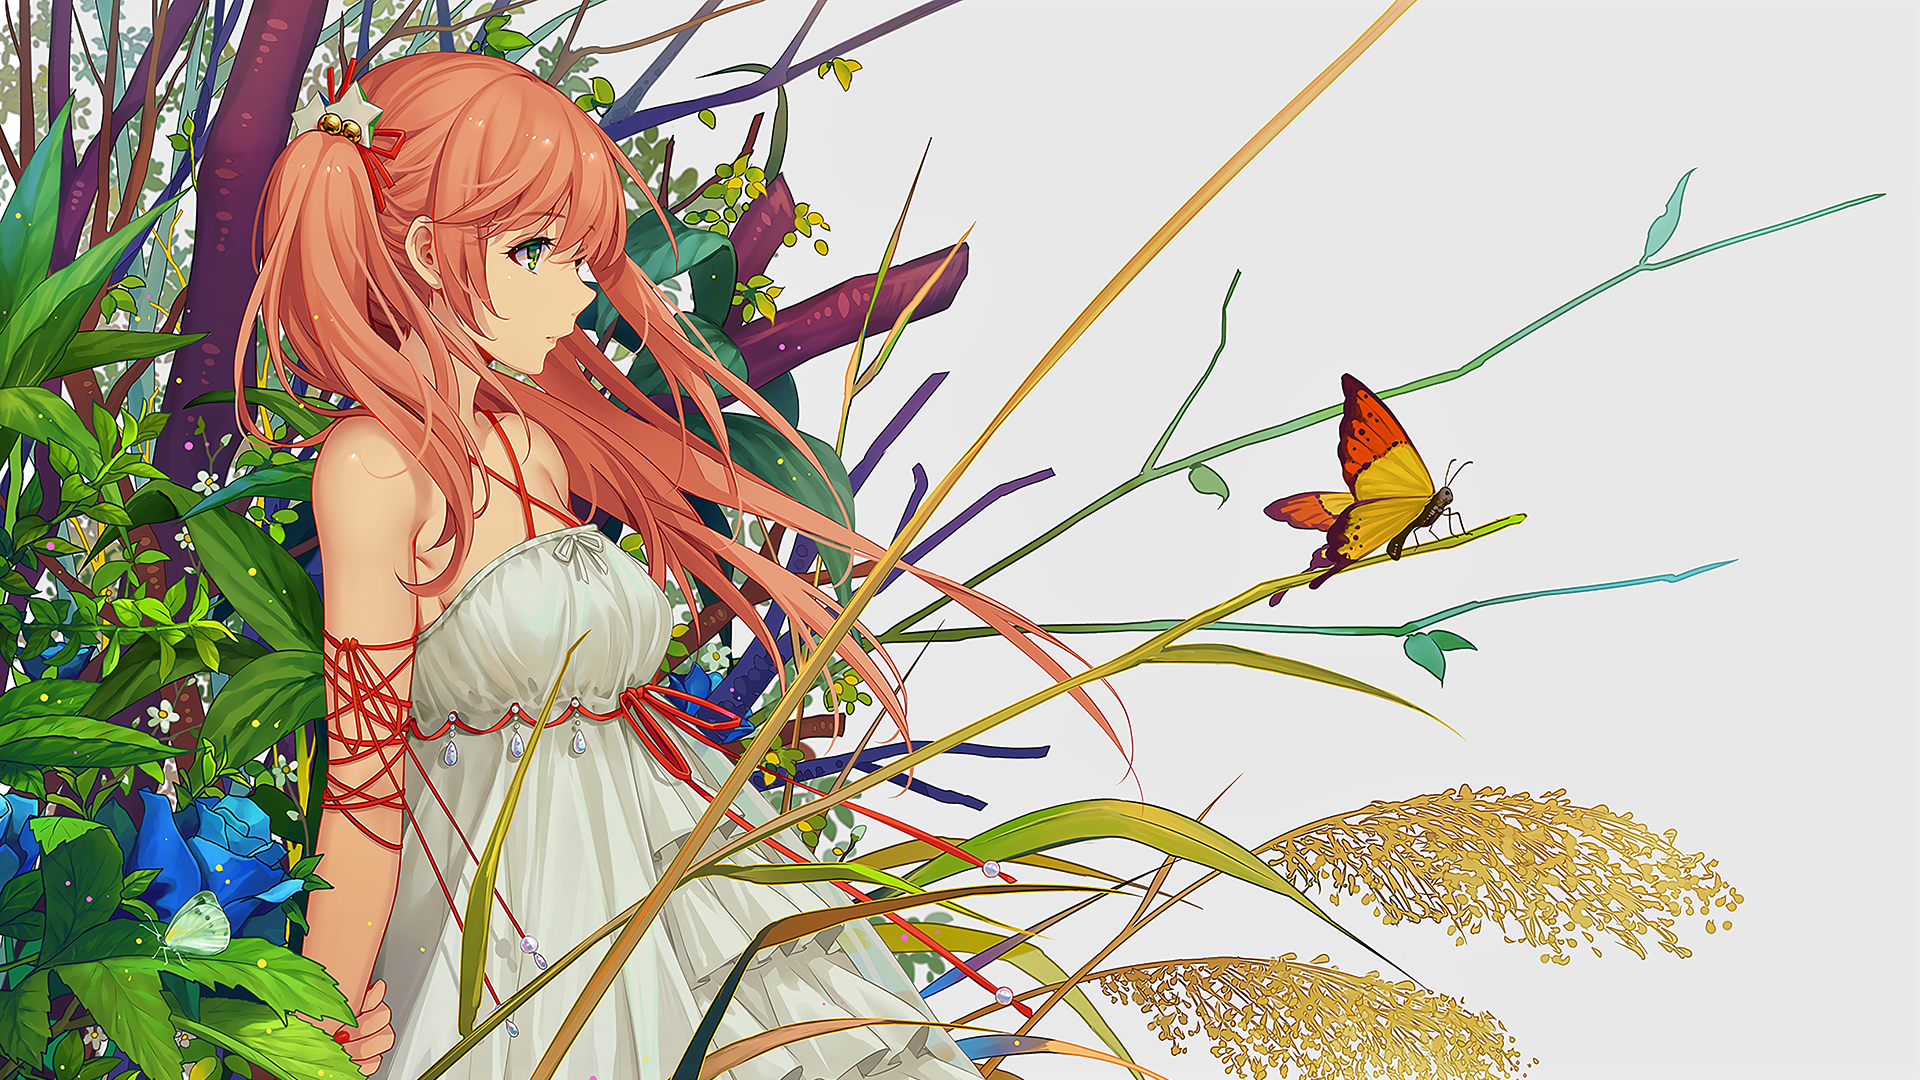 Anime Girl and Butterfly